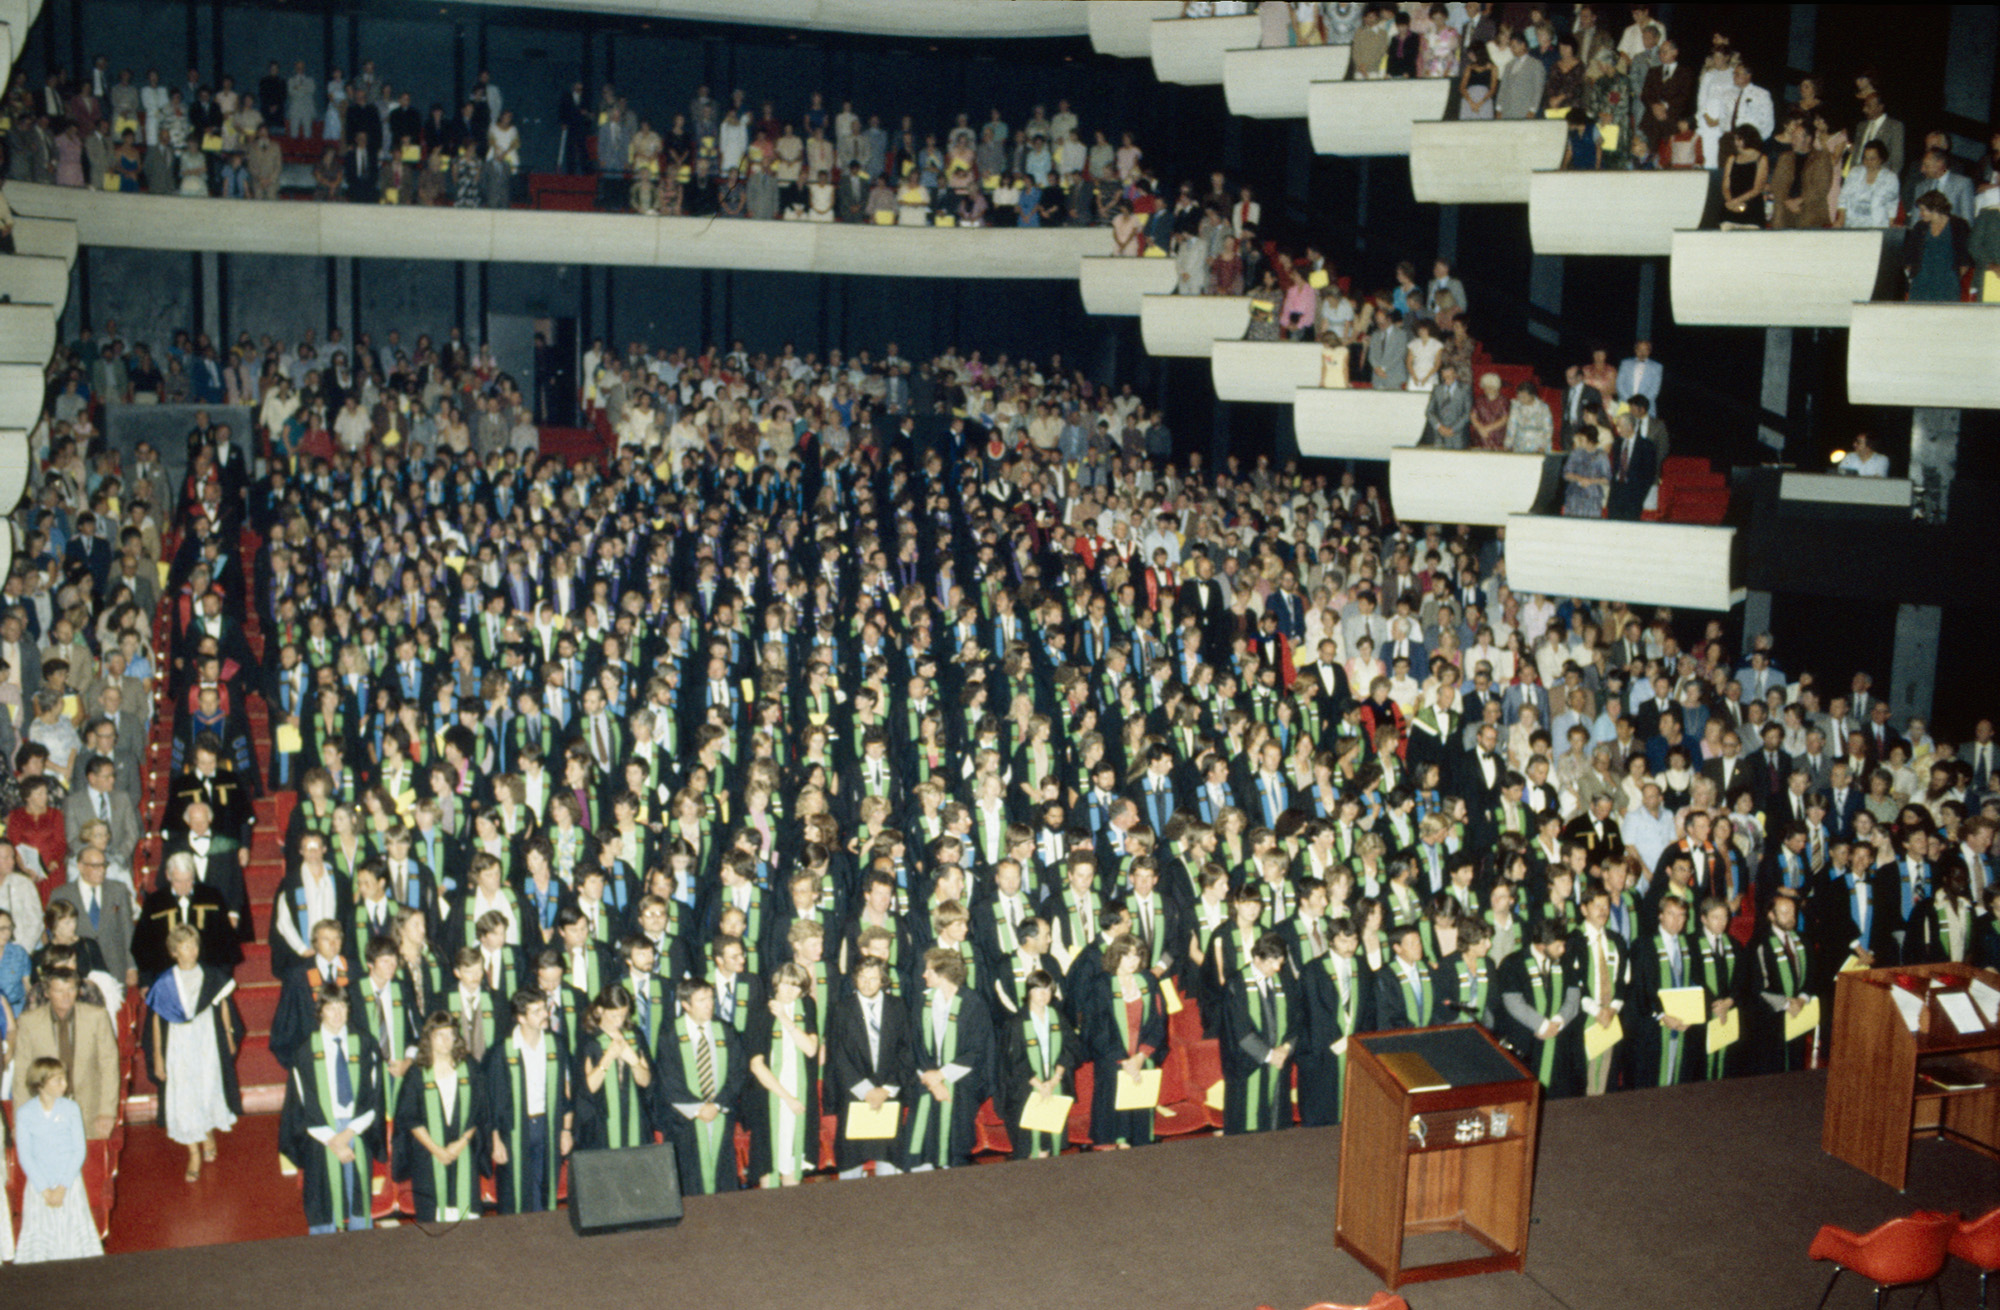 a concert hall room at a graduation ceremony. the seats are filled with graduates wearing black academic gowns and coloured sashes, and other attendees in plain clothing.